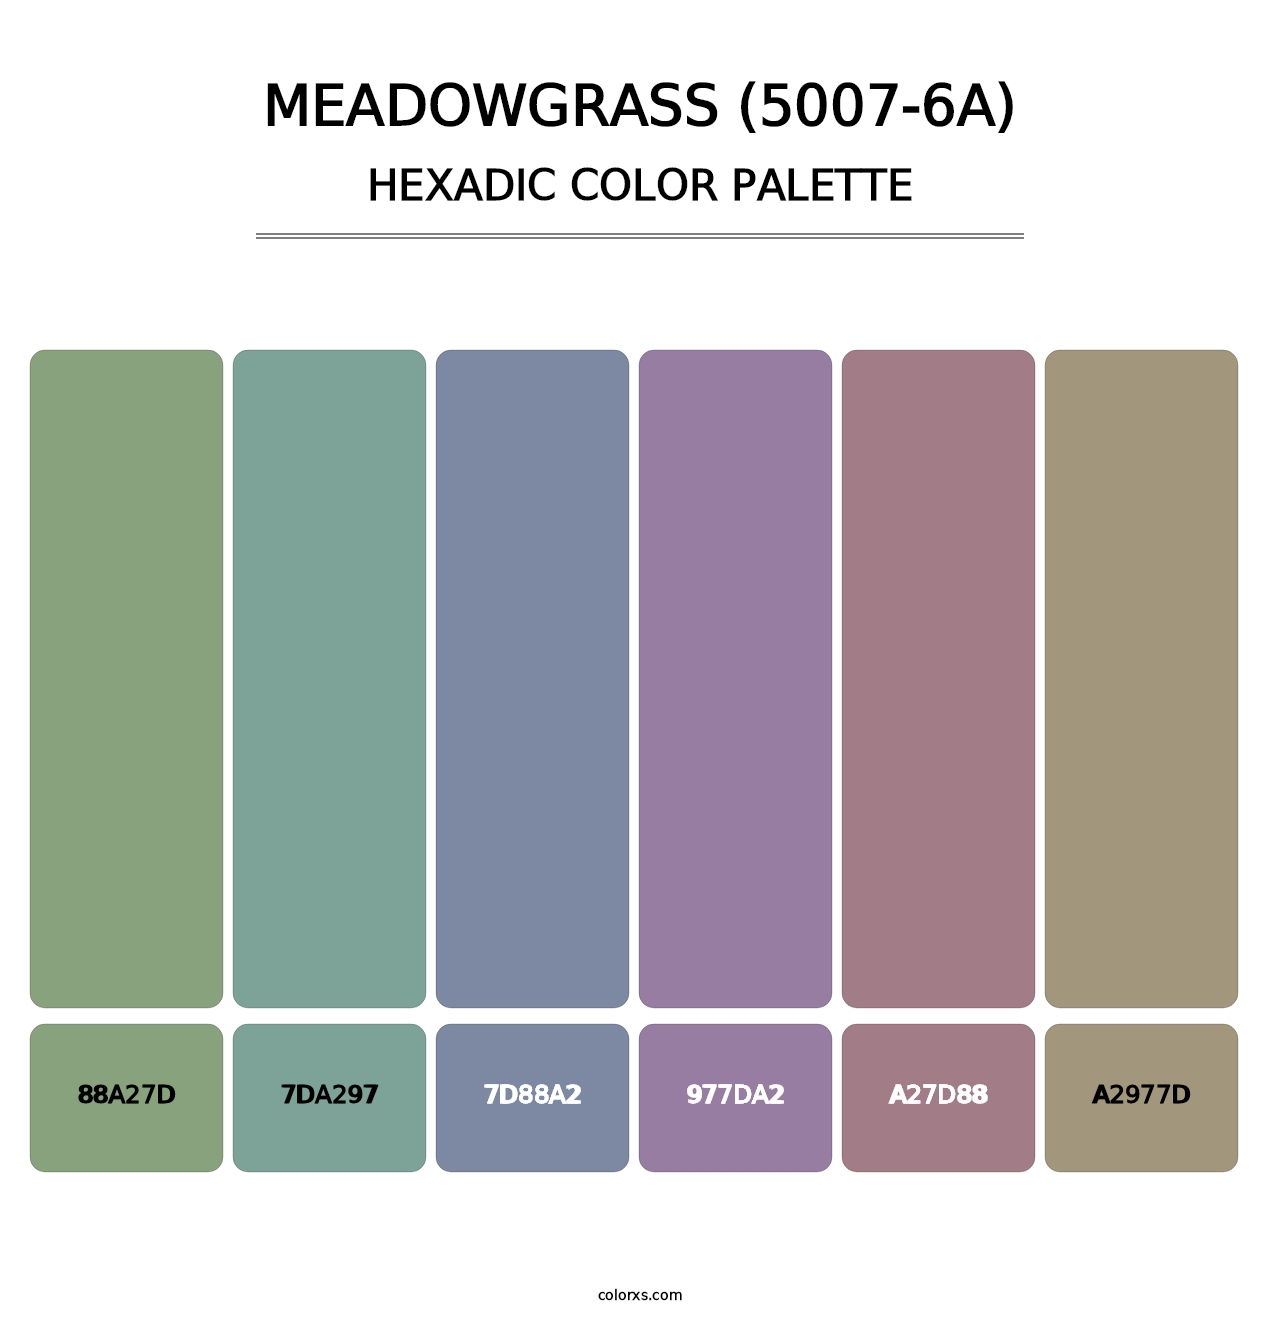 Meadowgrass (5007-6A) - Hexadic Color Palette